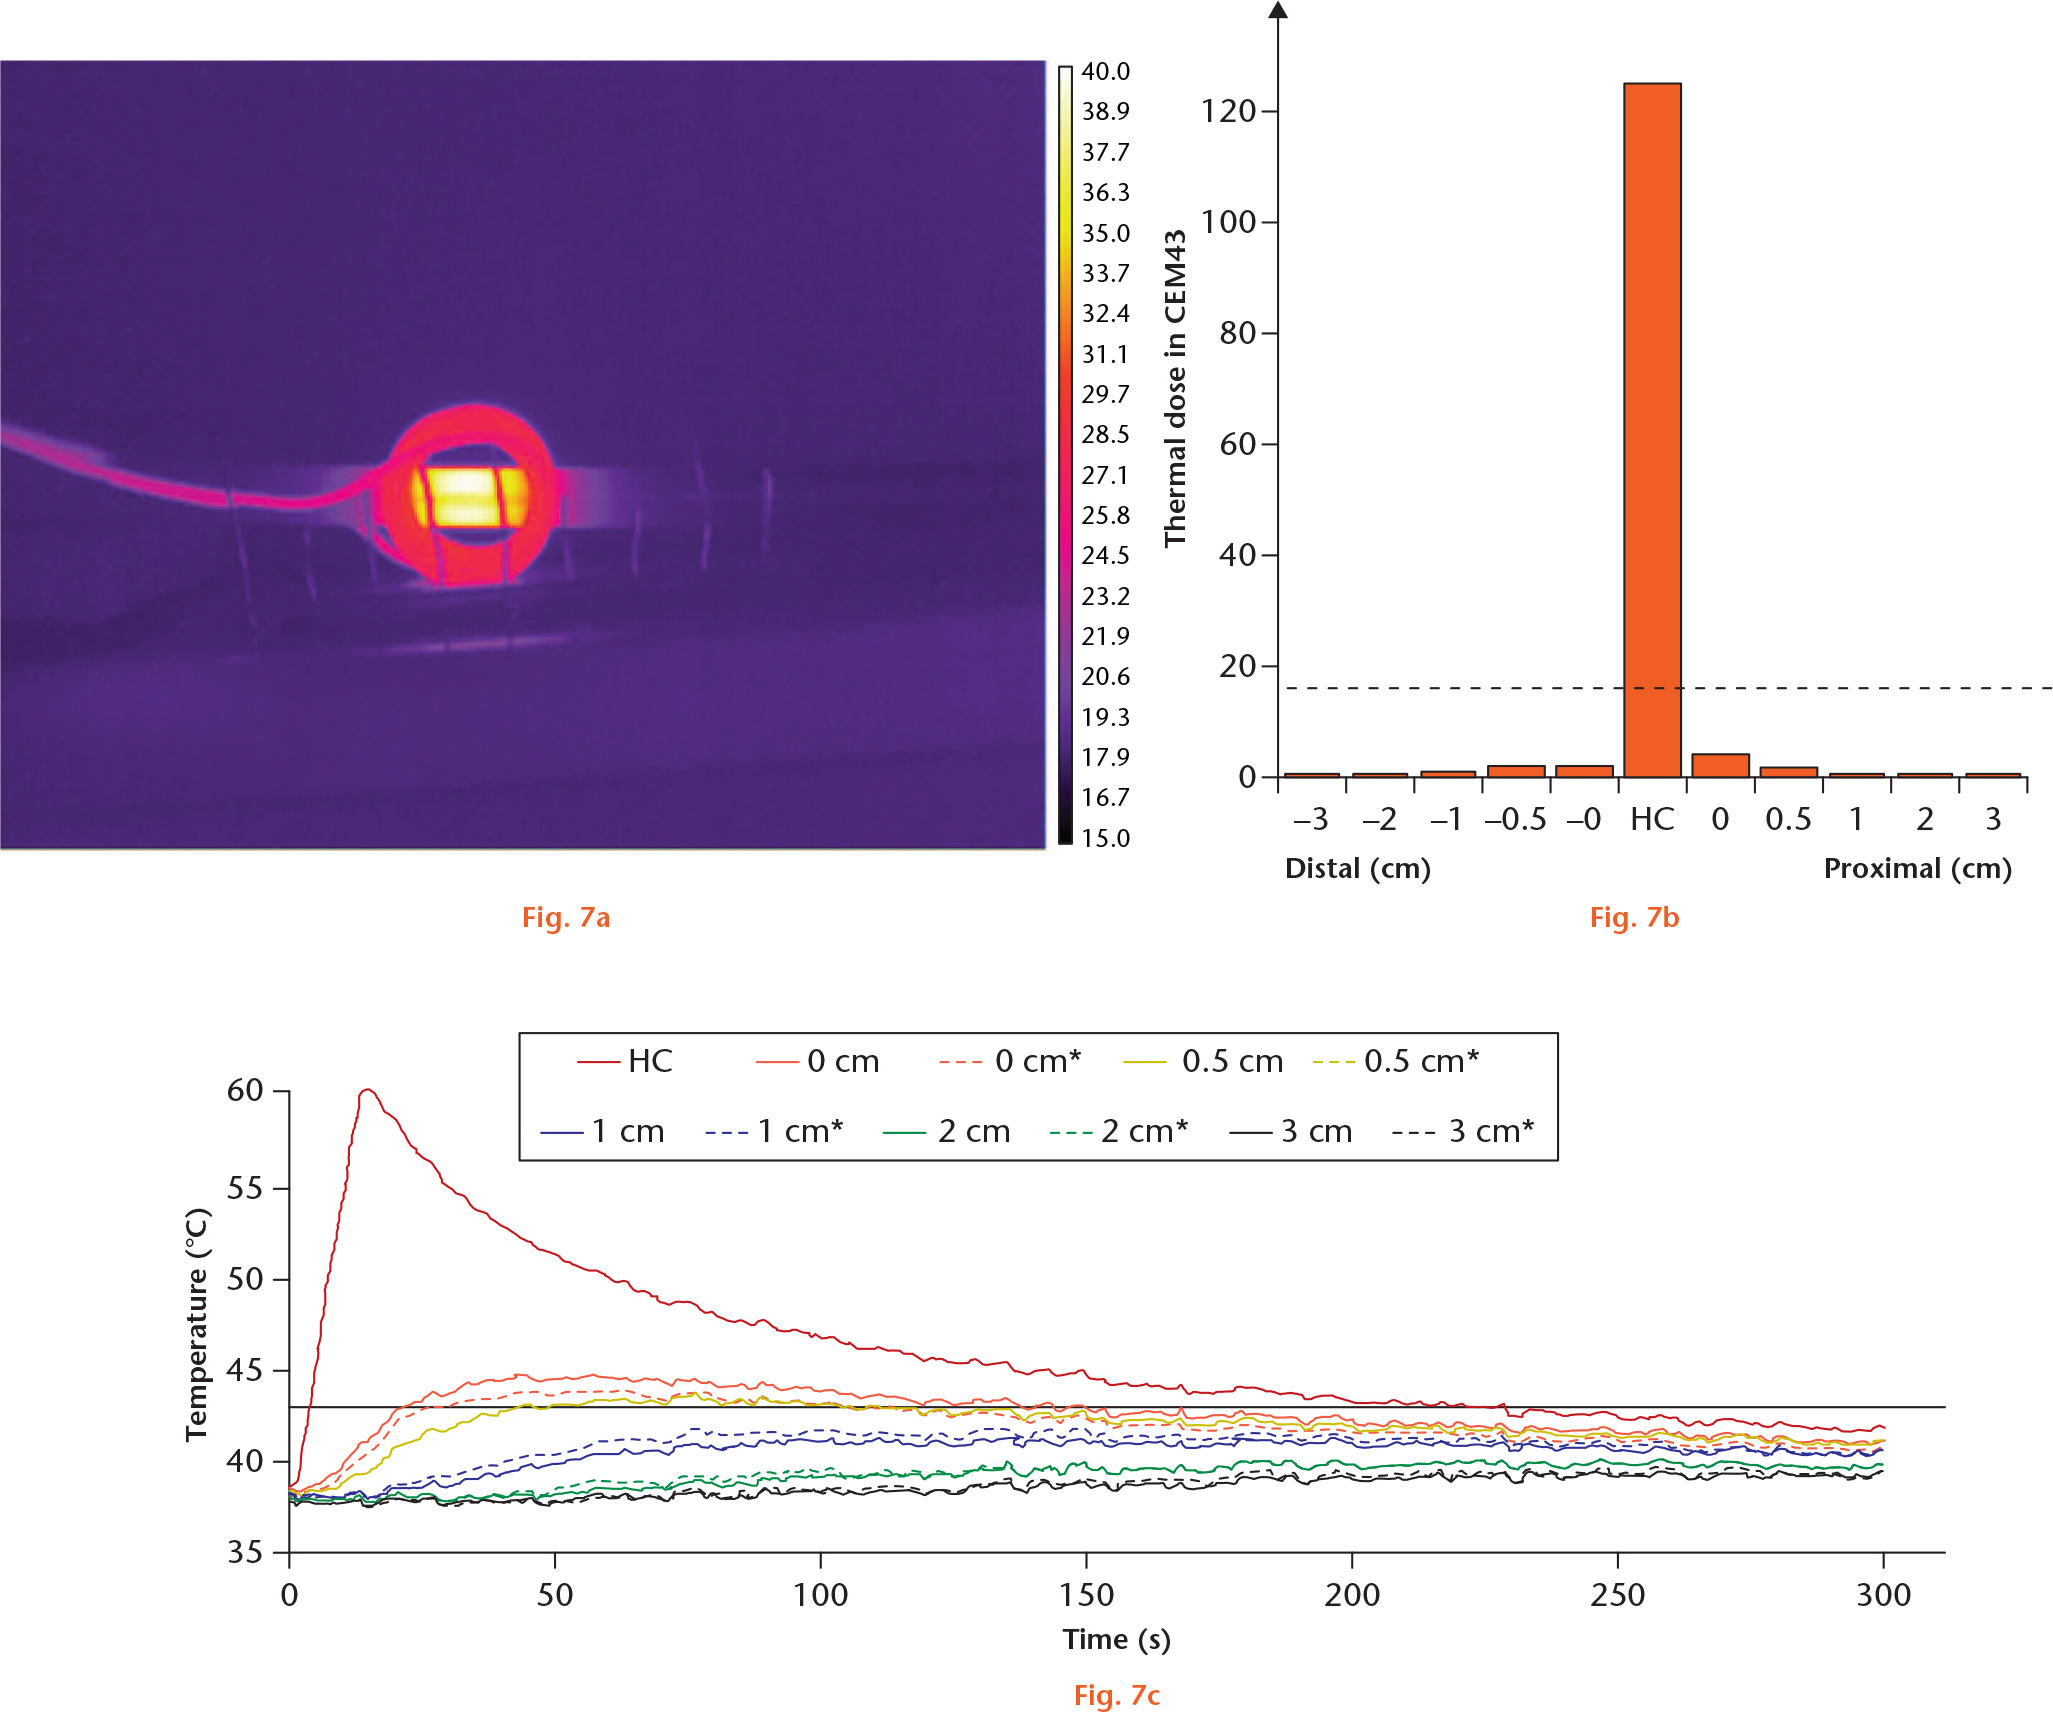  
            Segmental induction heating of intramedullary (IM) nail. a) A thermal image from a thermal camera showing selective heating. The vertical lines have 1 cm spacing. b) A graph showing thermal dose in CEM43 at several distances from the heating centre (HC). The dashed line represents 16 CEM43, the threshold for necrosis of bone. c) A graph showing the temperature at several distances from the HC during the segmental induction heating and thereafter. Dashed lines indicate distal direction.
          